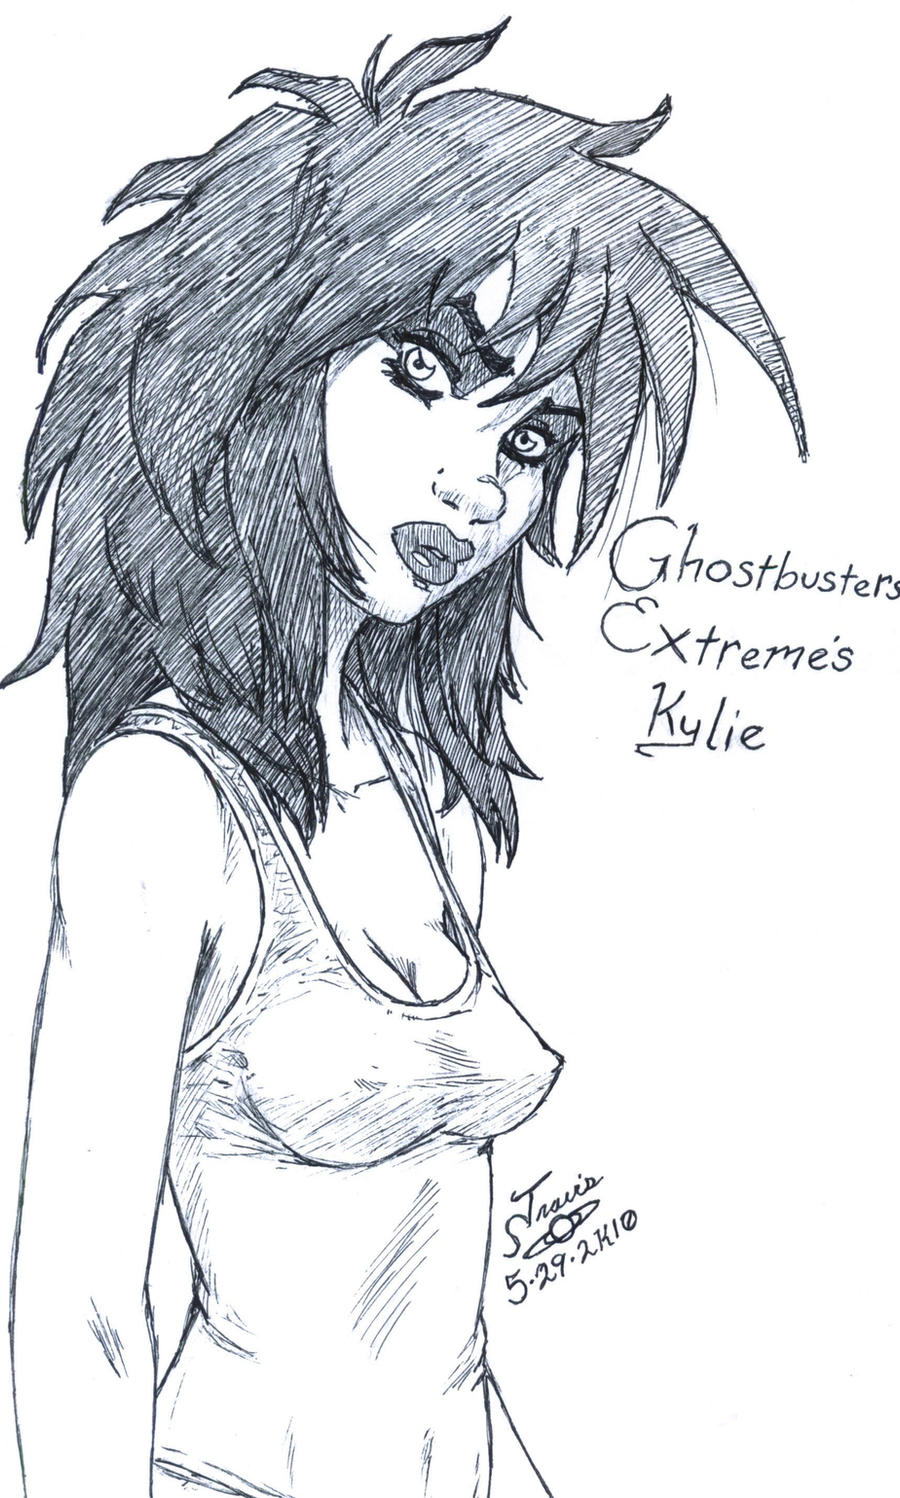 Ghostbusters Extreme's Kylie by zmorphcom on DeviantArt